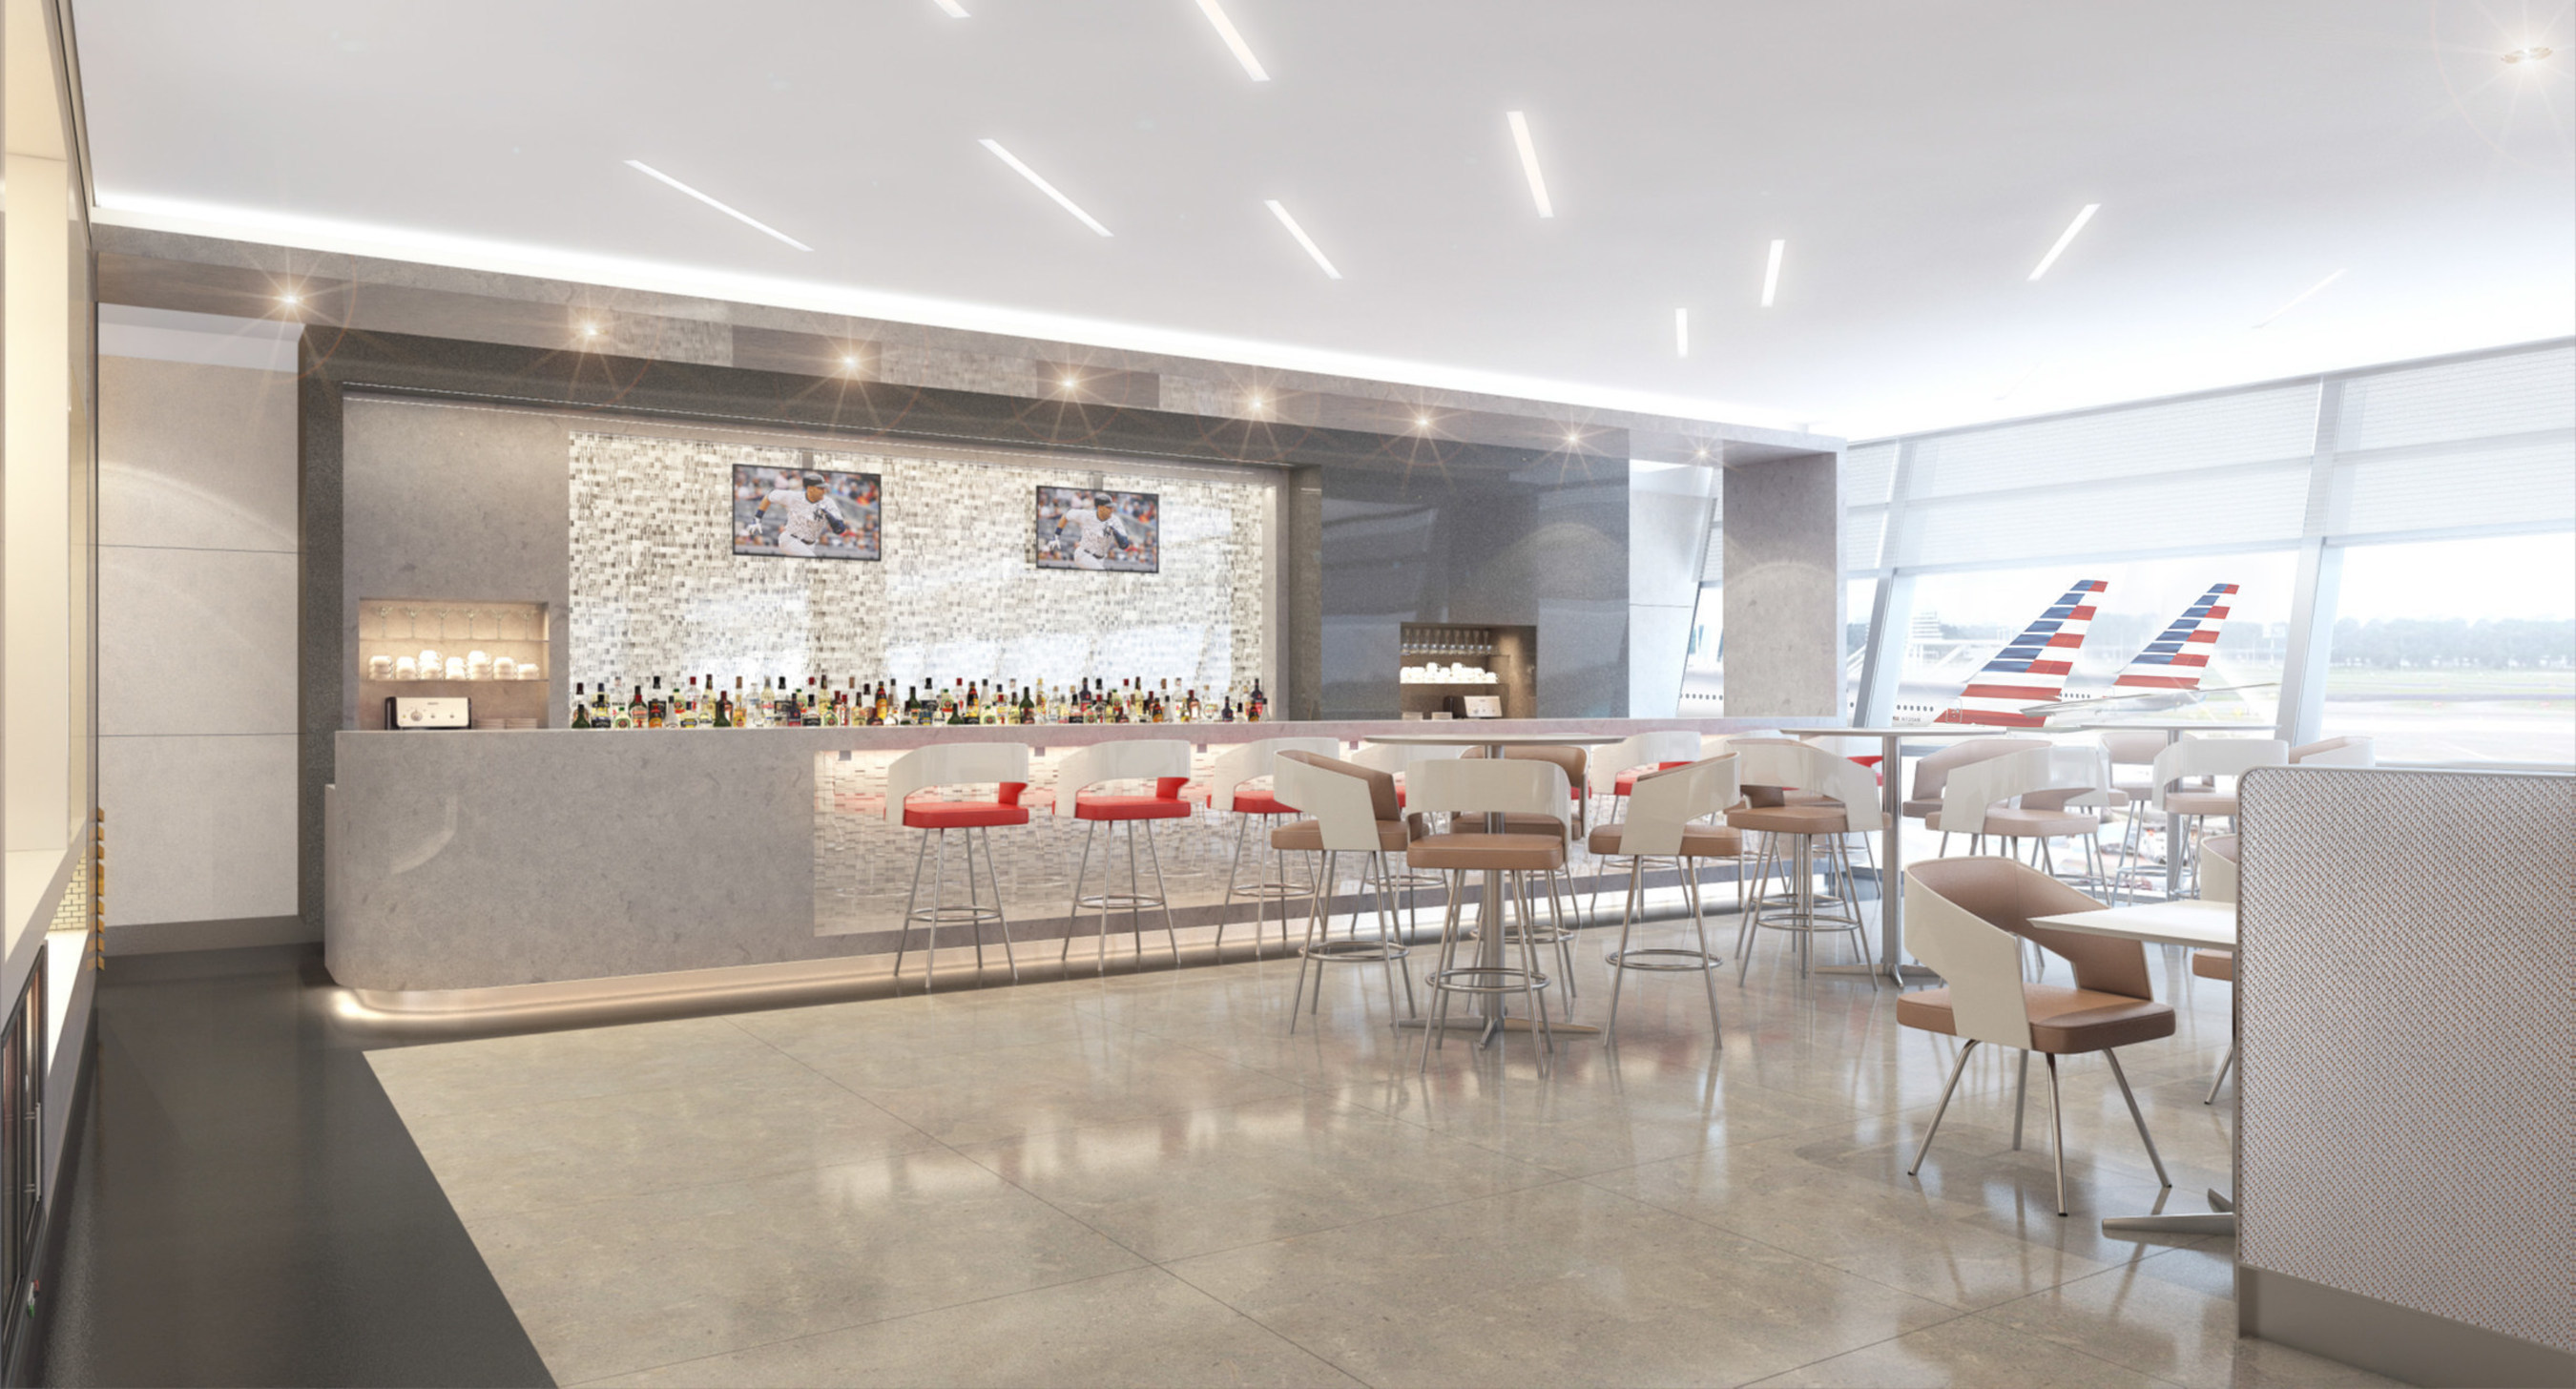 Rendering shows the new look for future Admirals Club lounge bars by James Park Associates Ltd.